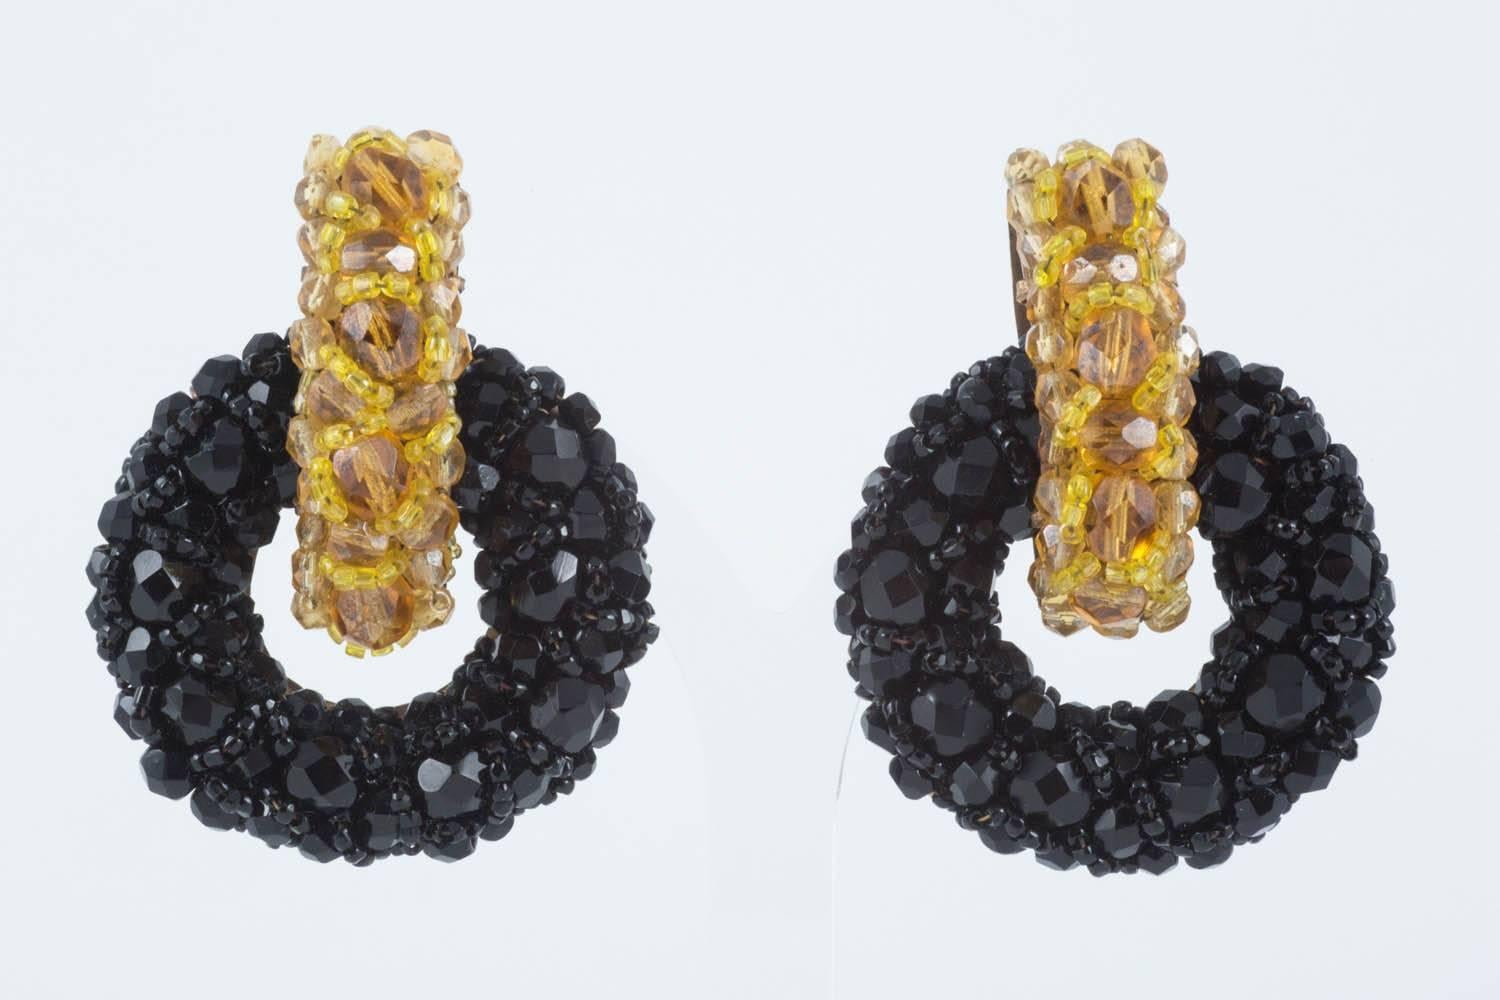 These magnificent large earrings, from Coppola e Toppo, made from pave- embroidered half-crystal faceted beads in jet black and topaz, are constructed of one  piece of hand cut metal, the beadwork encrusted on top. Chic and a great colour